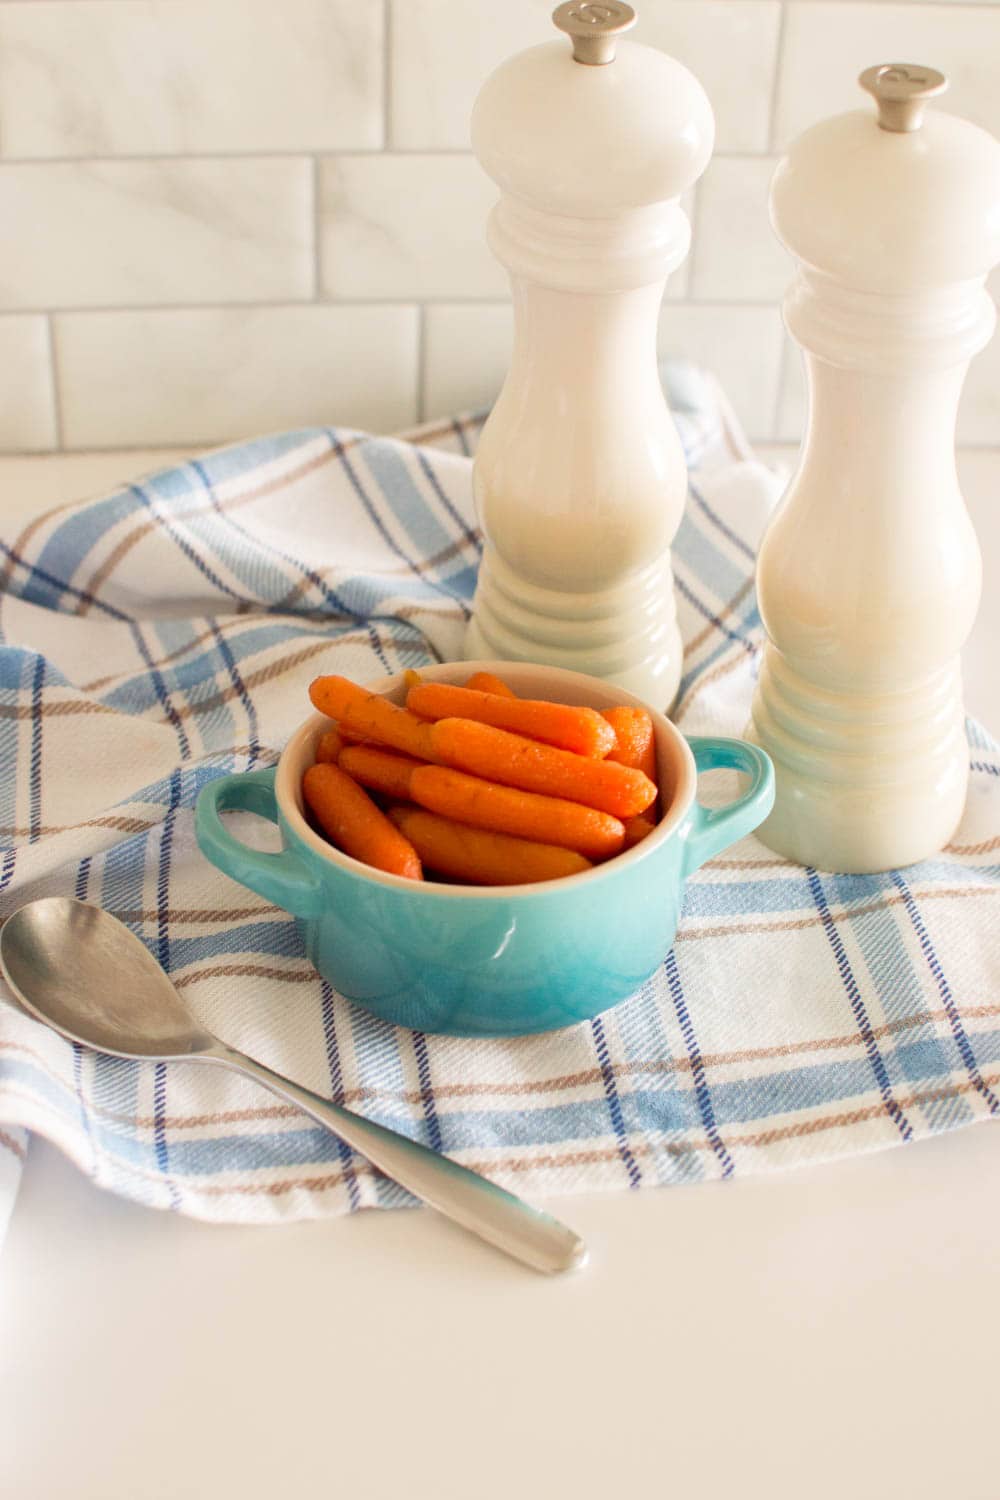 Our honey glazed baby carrots served in a turquoise bowl, with a spoon and salt and pepper shakers on the side